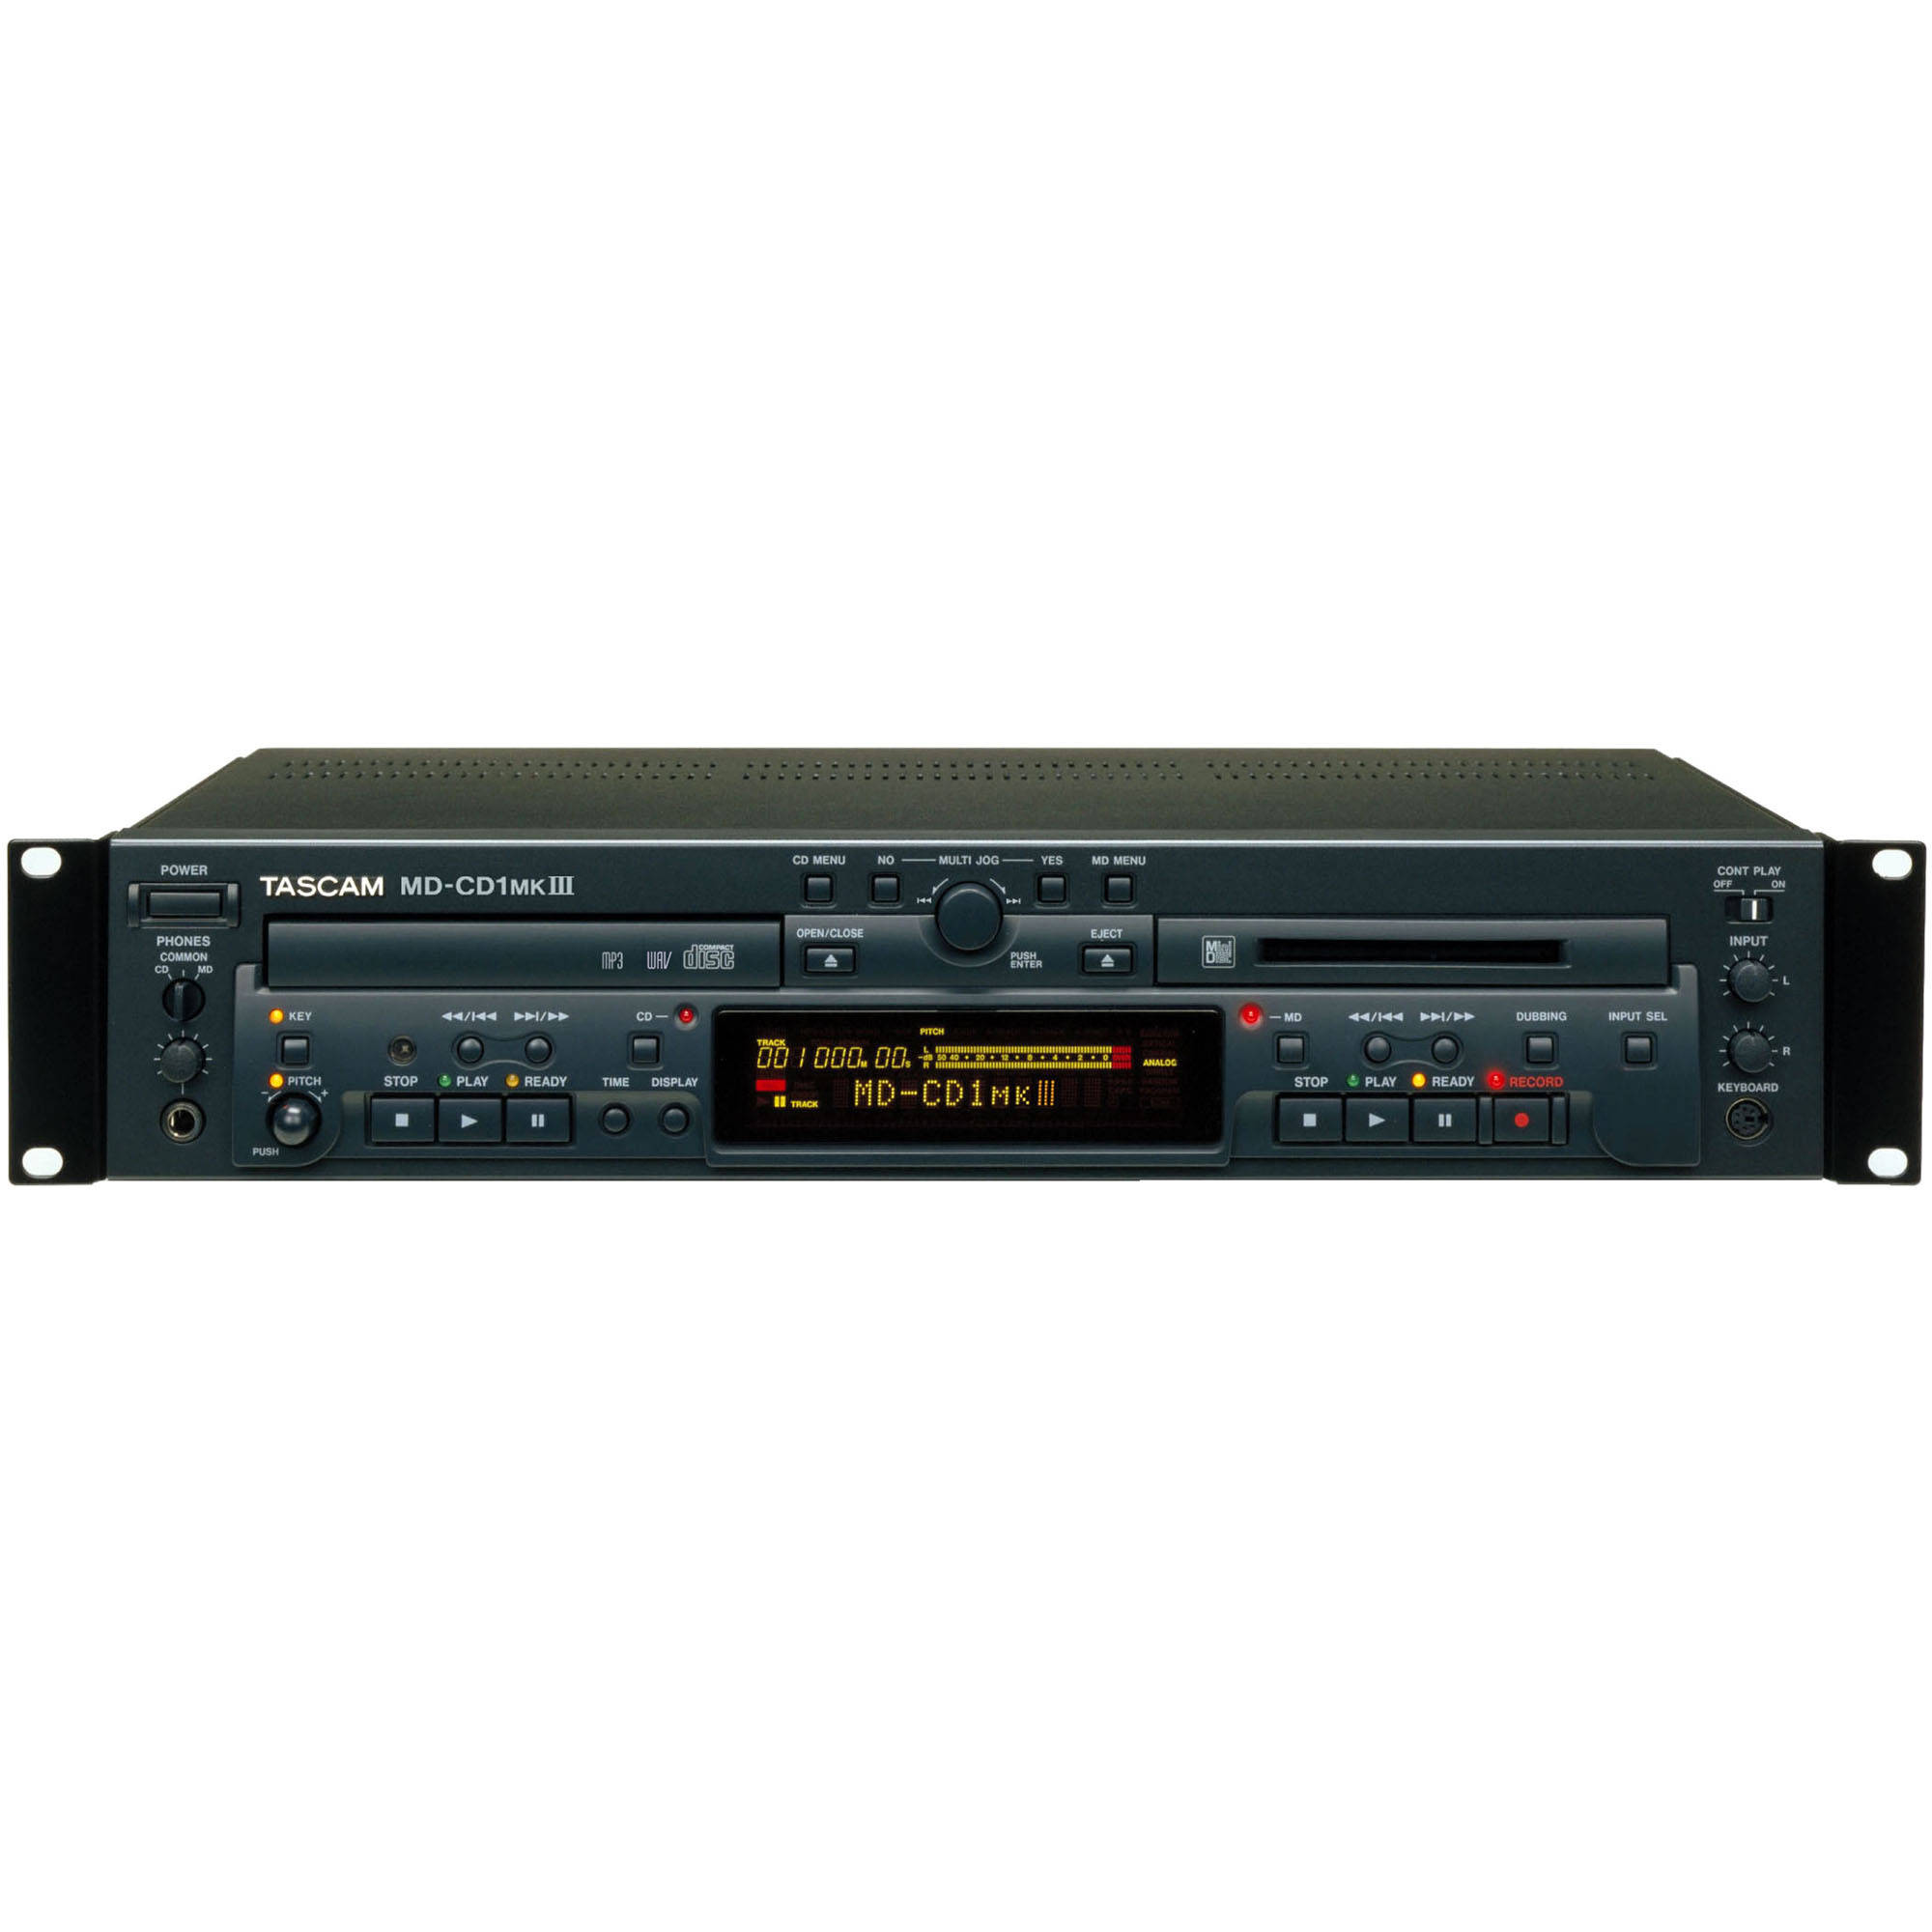 Tascam Md Cd1mkiii Combination Cd Player And Minidisc